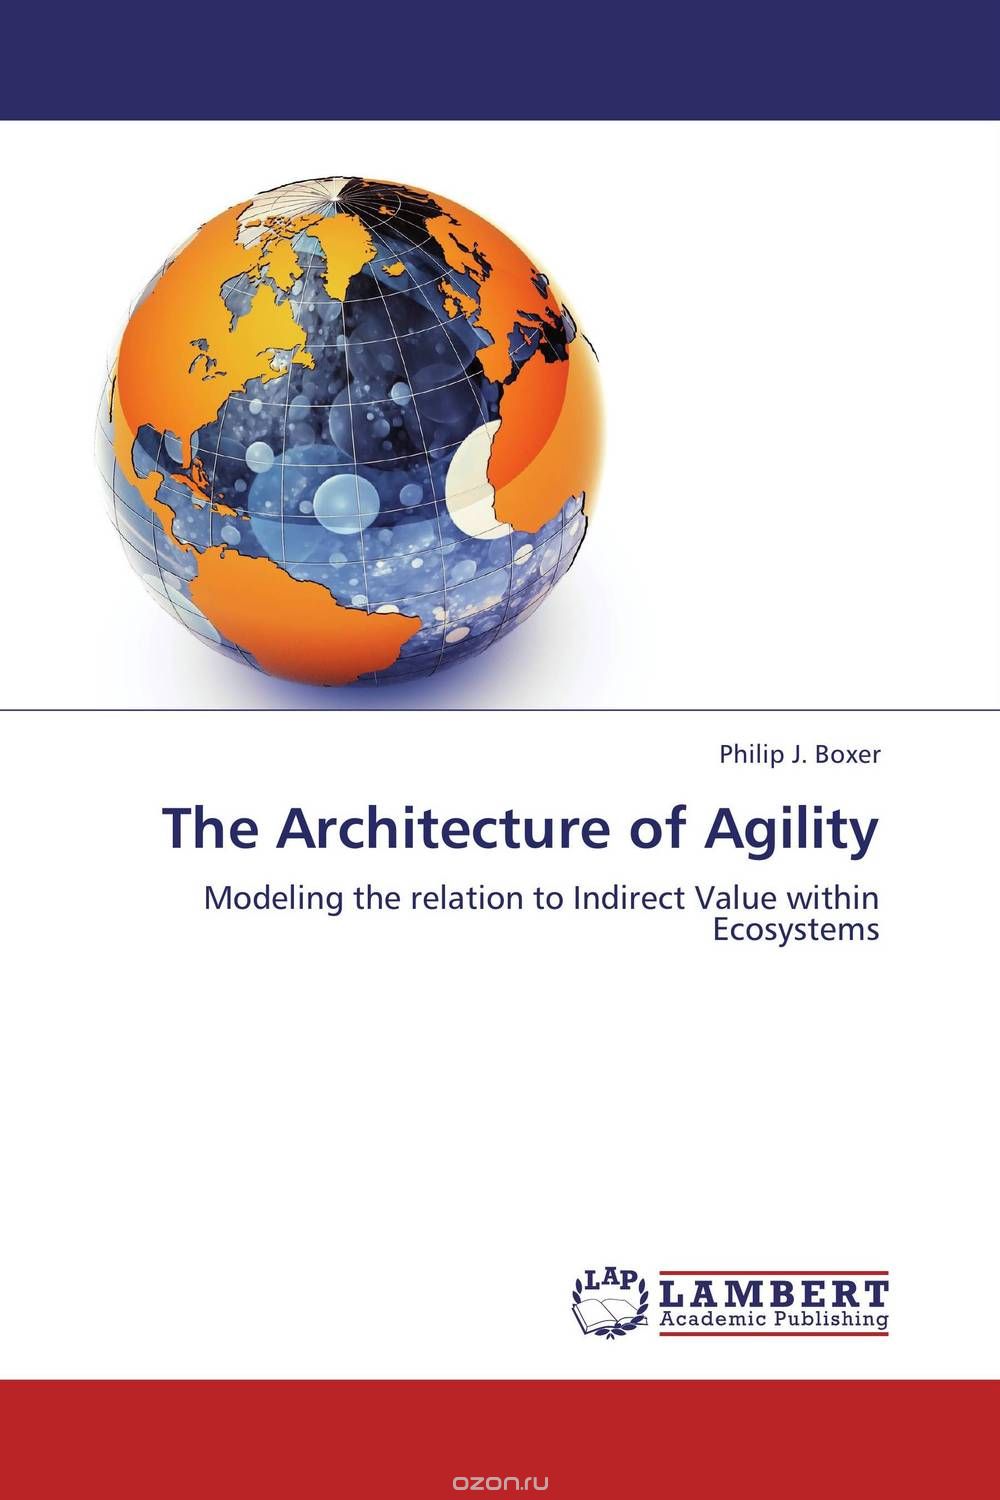 The Architecture of Agility